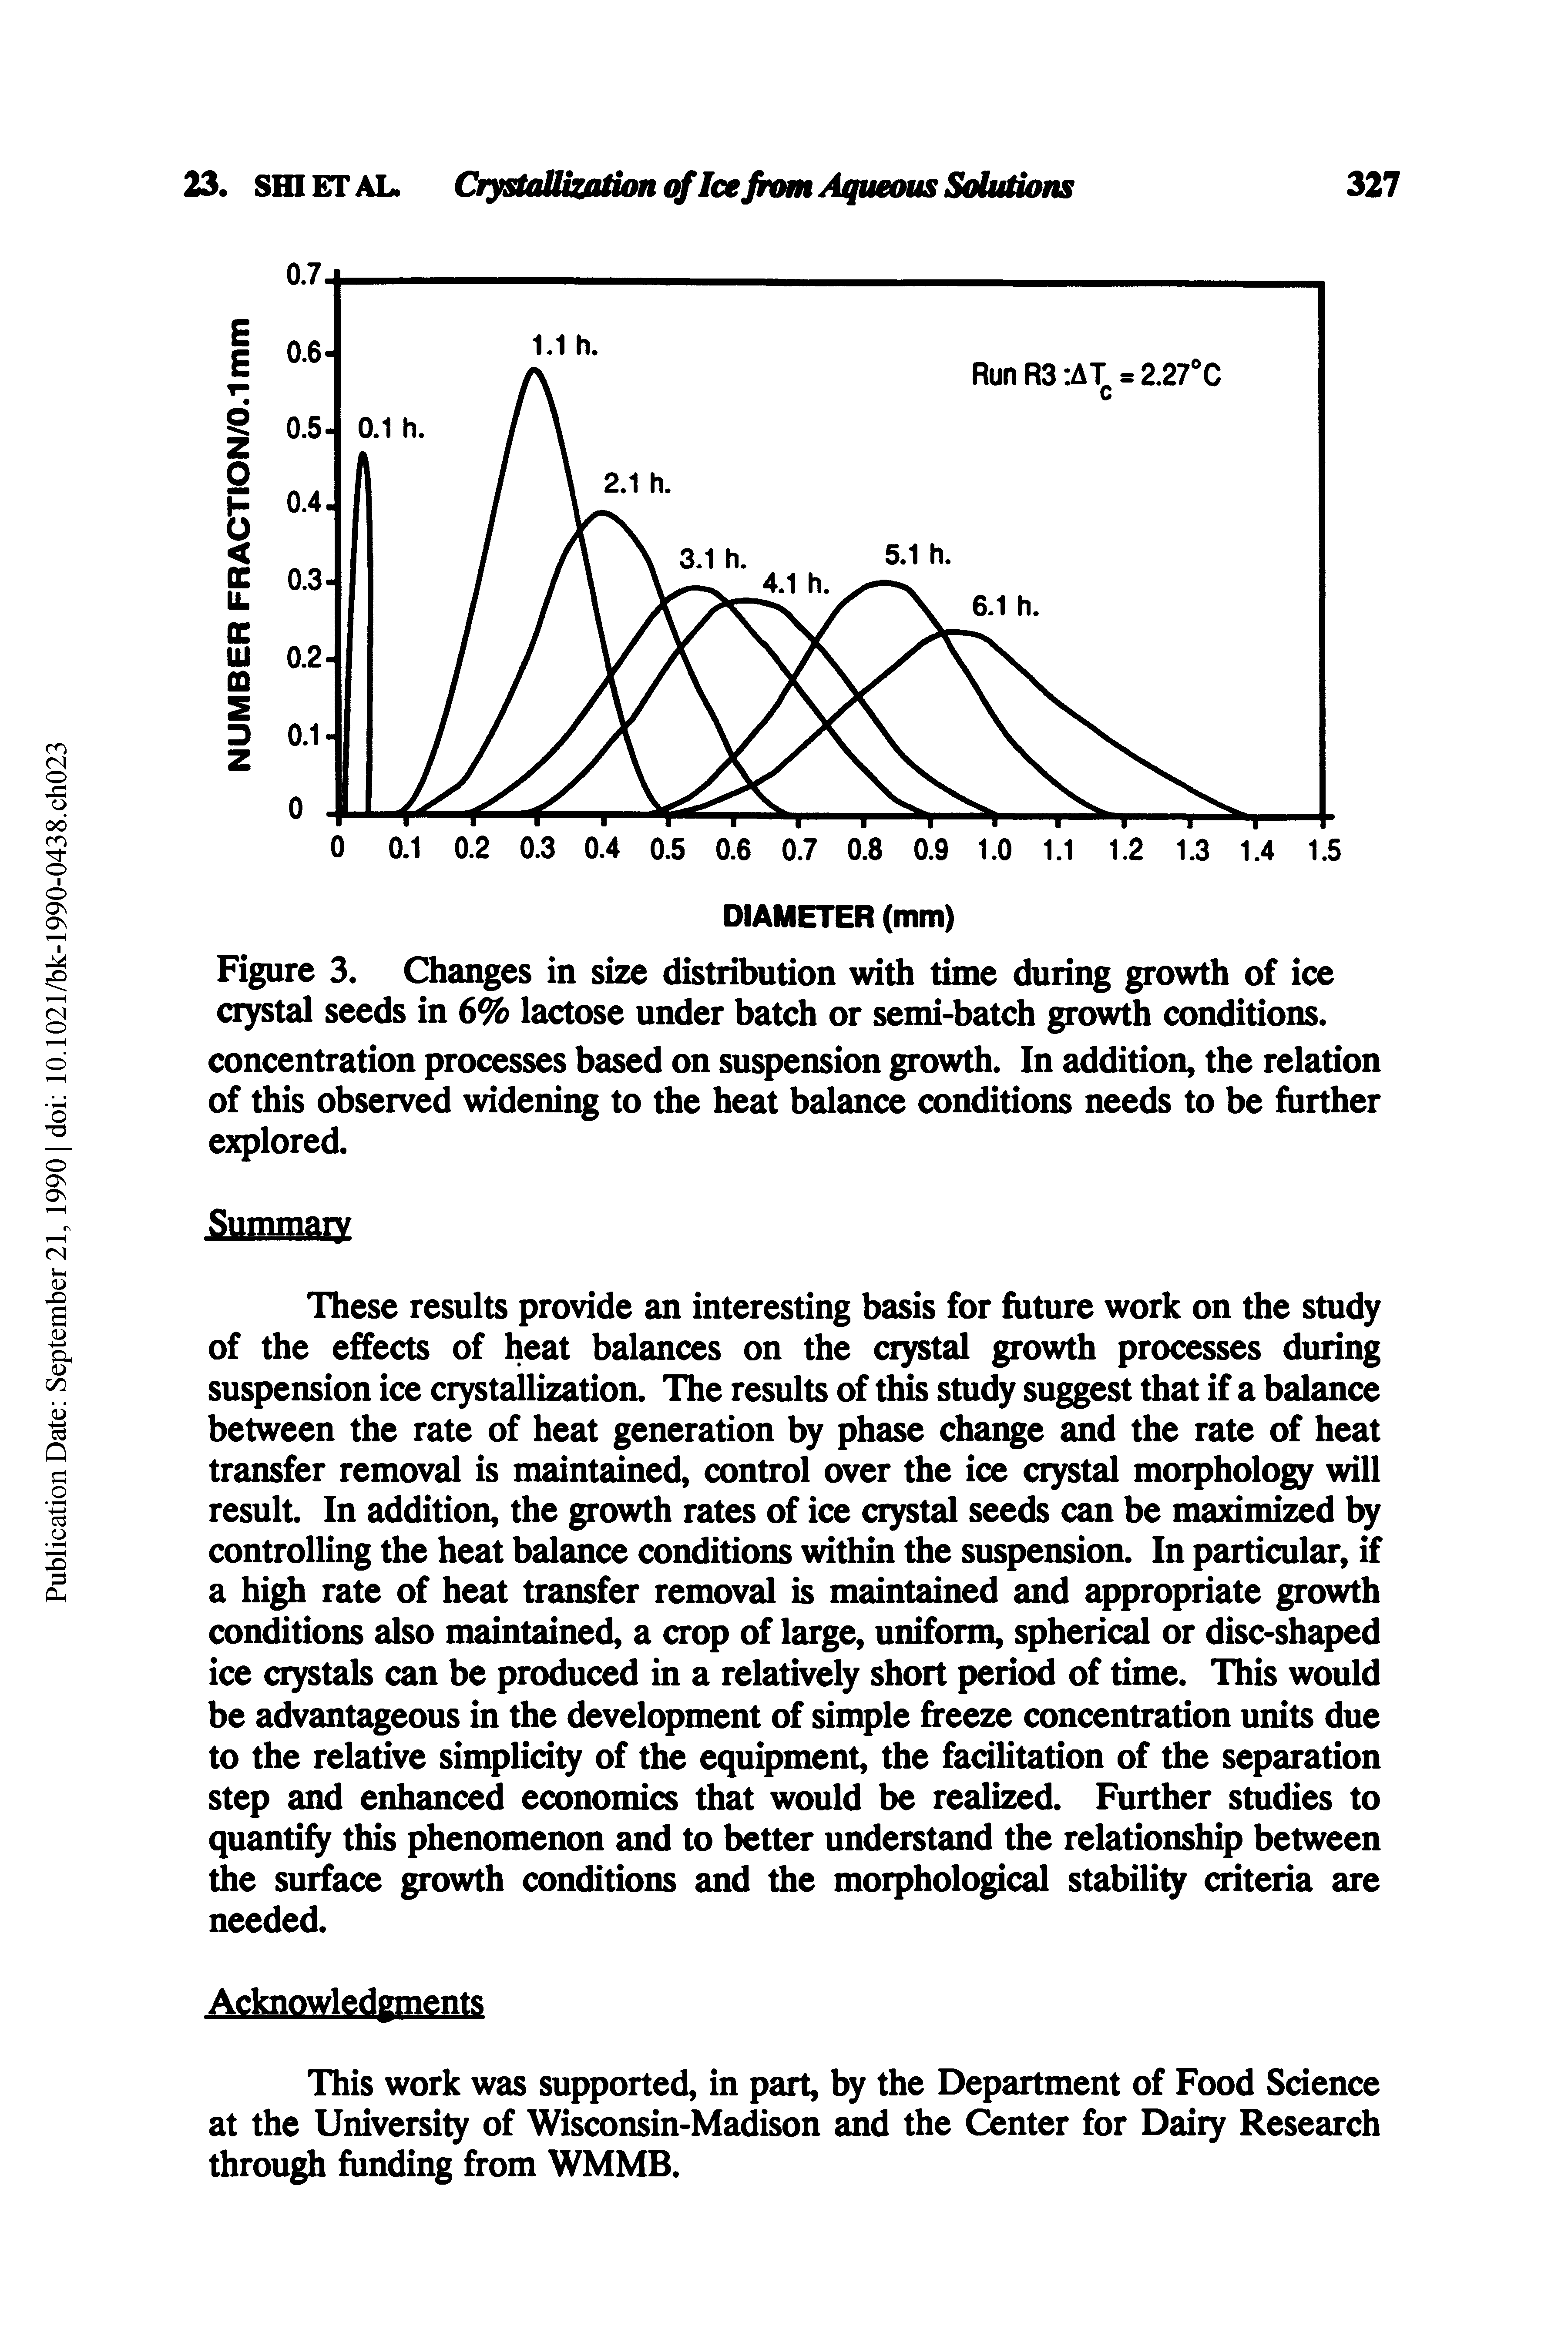 Figure 3. Changes in size distribution with time during growth of ice crystal seeds in 6% lactose under batch or semi-batch growth conditions, concentration processes based on suspension growth. In addition, the relation of this observed widening to the heat balance conditions needs to be further explored.